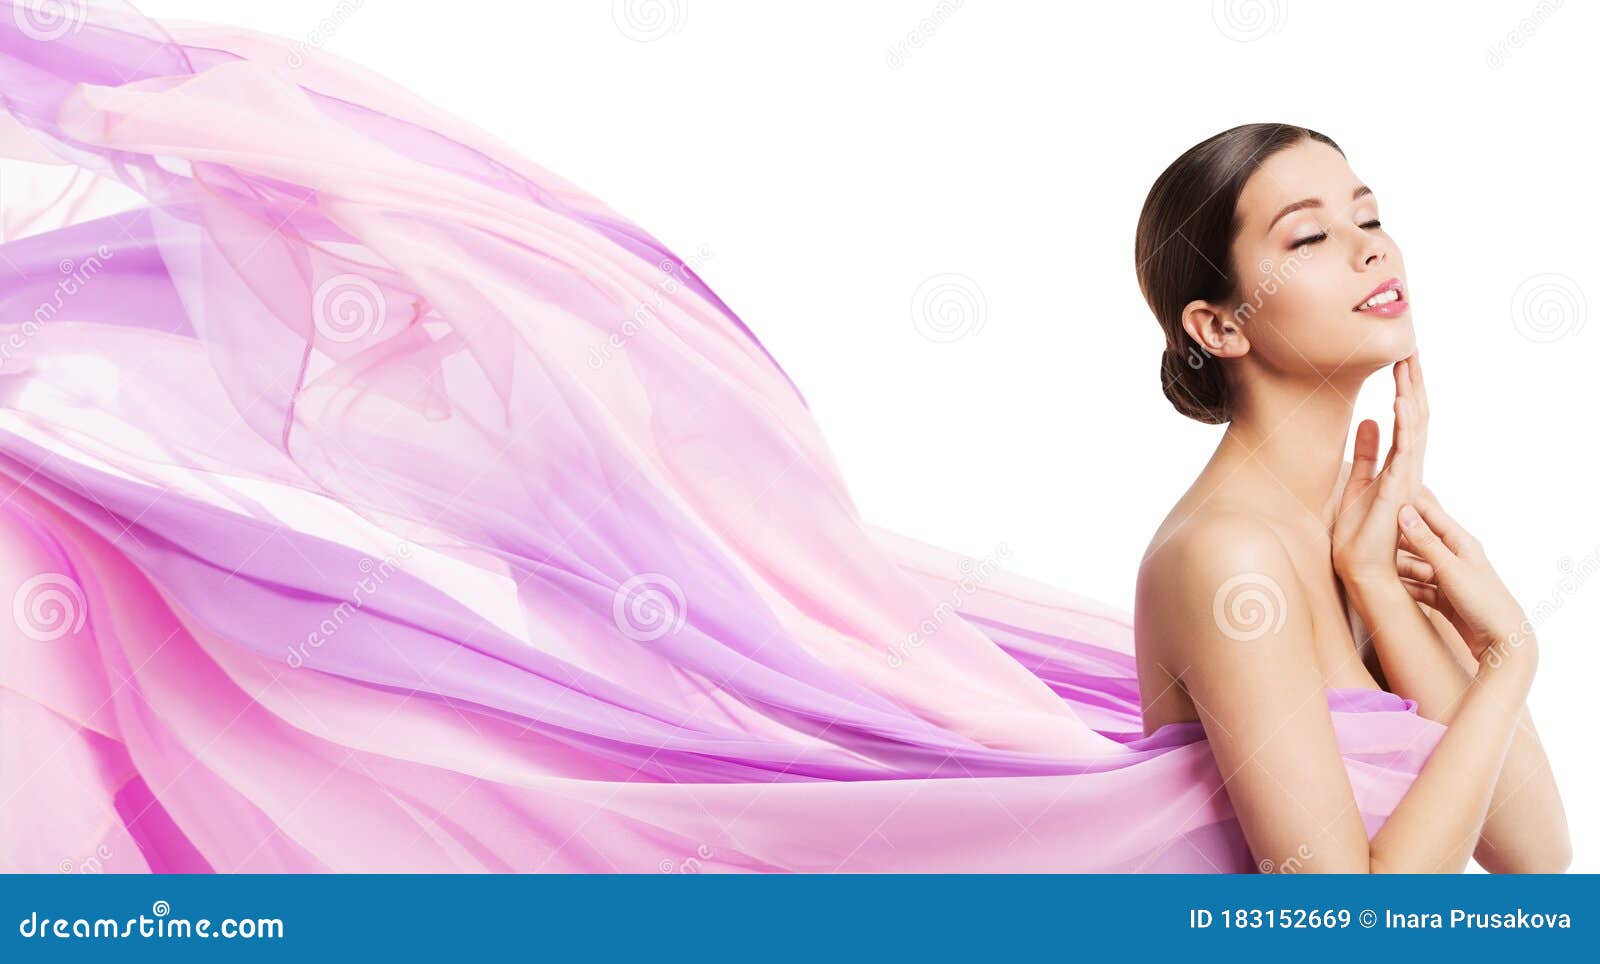 beauty makeup skin care, woman touching face, young girl in pink waving cloth fluttering wind on white